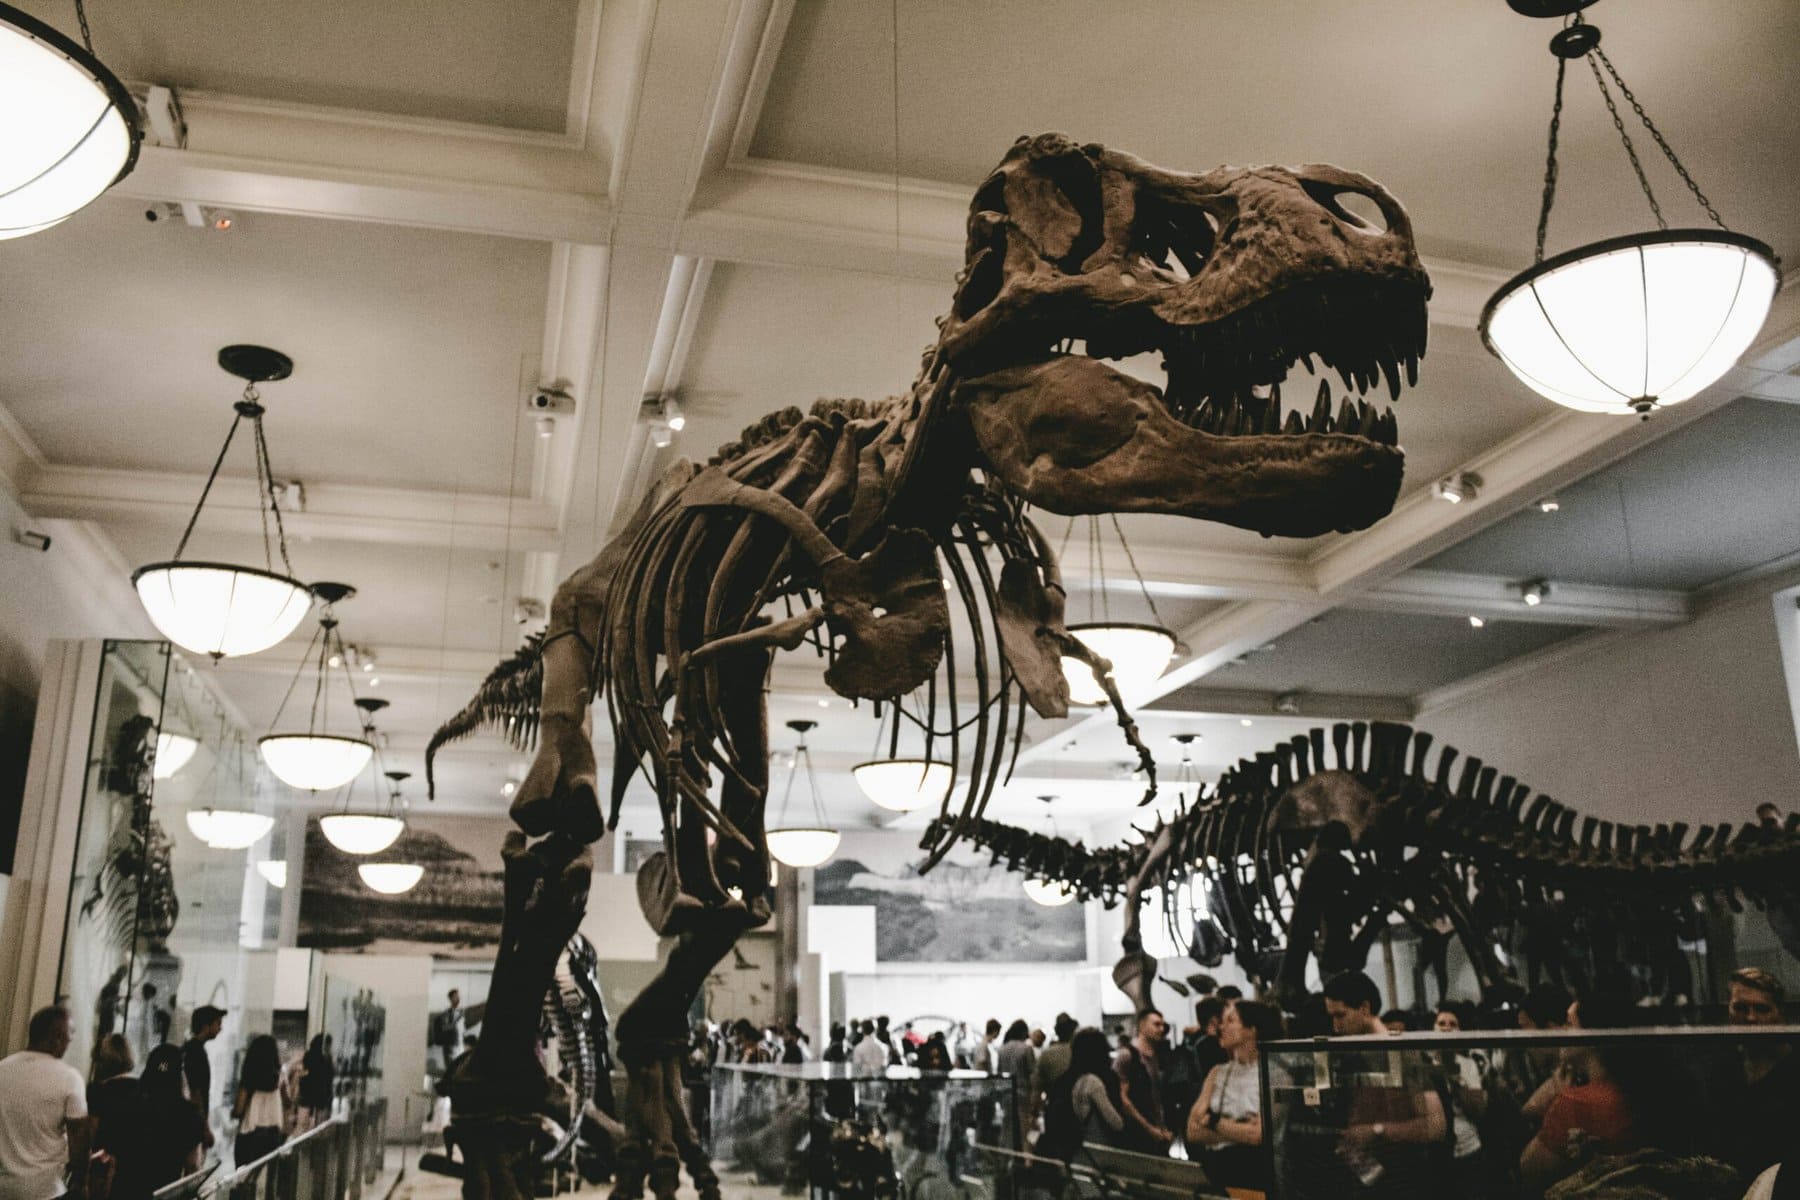 In the Natural History museum of New York, an impressive T-rex skeleton is displayed.